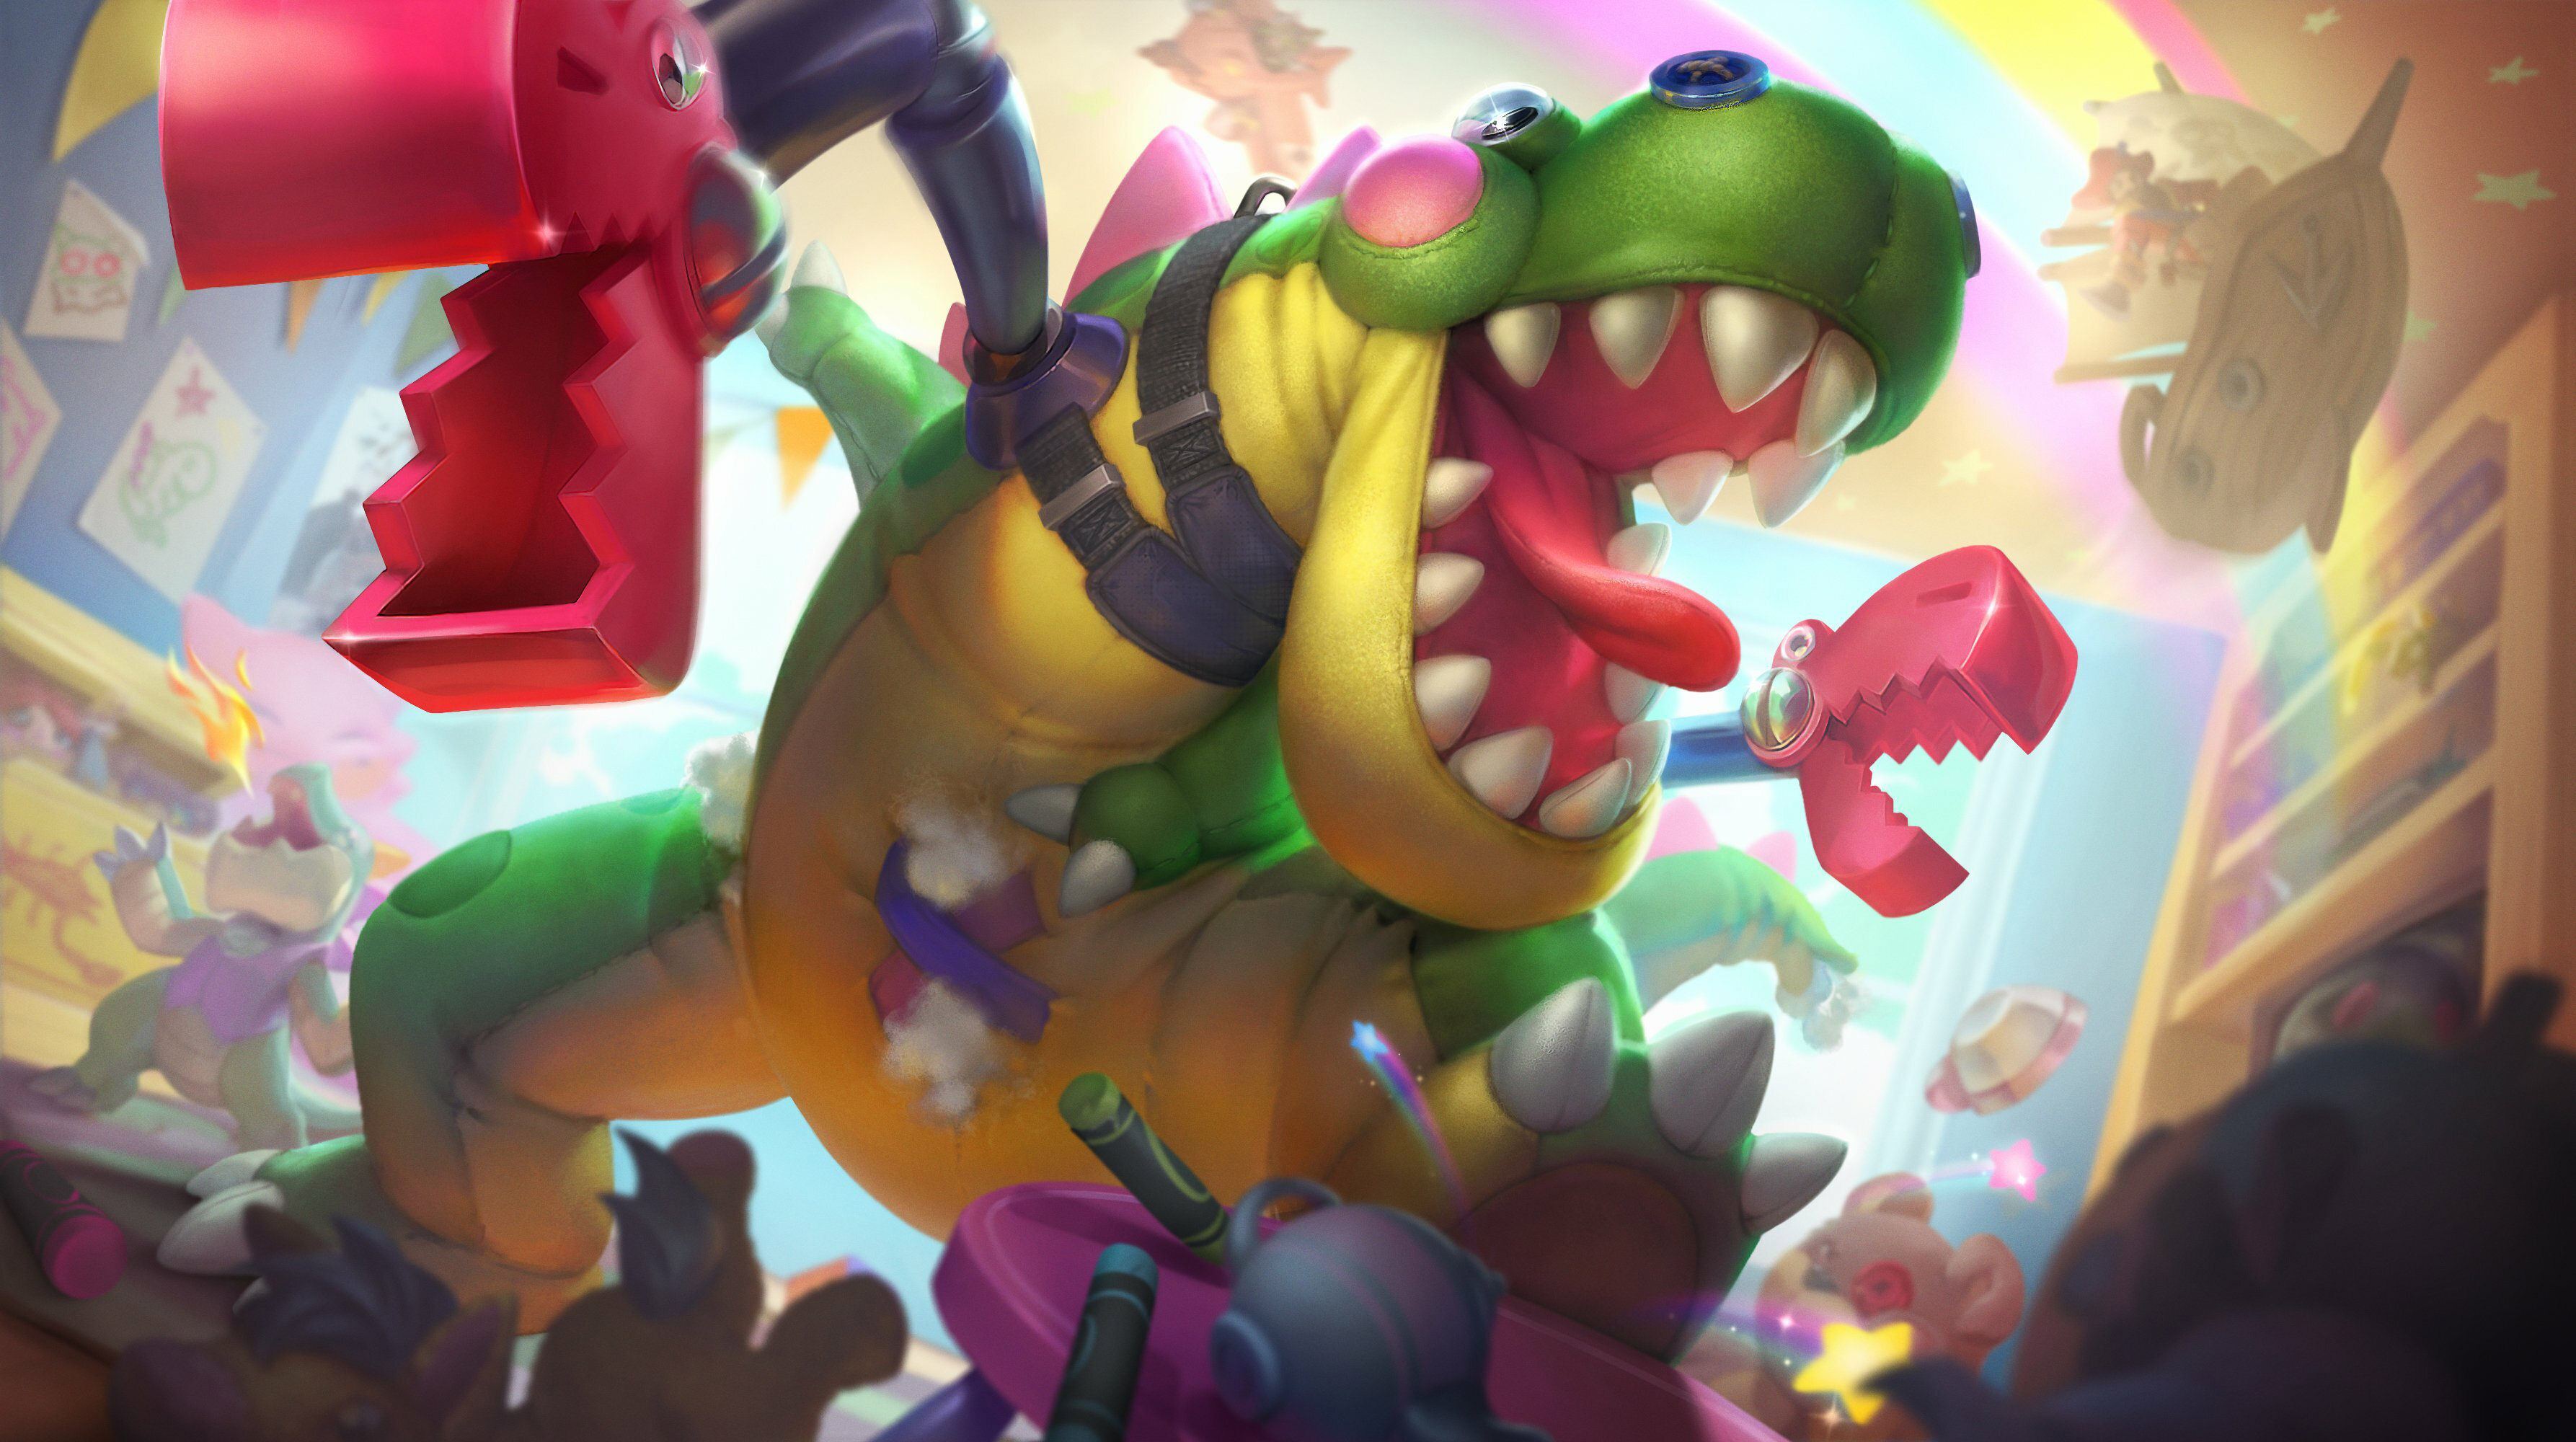 League of Legends New April Fools Skins Revealed And They're Amazing